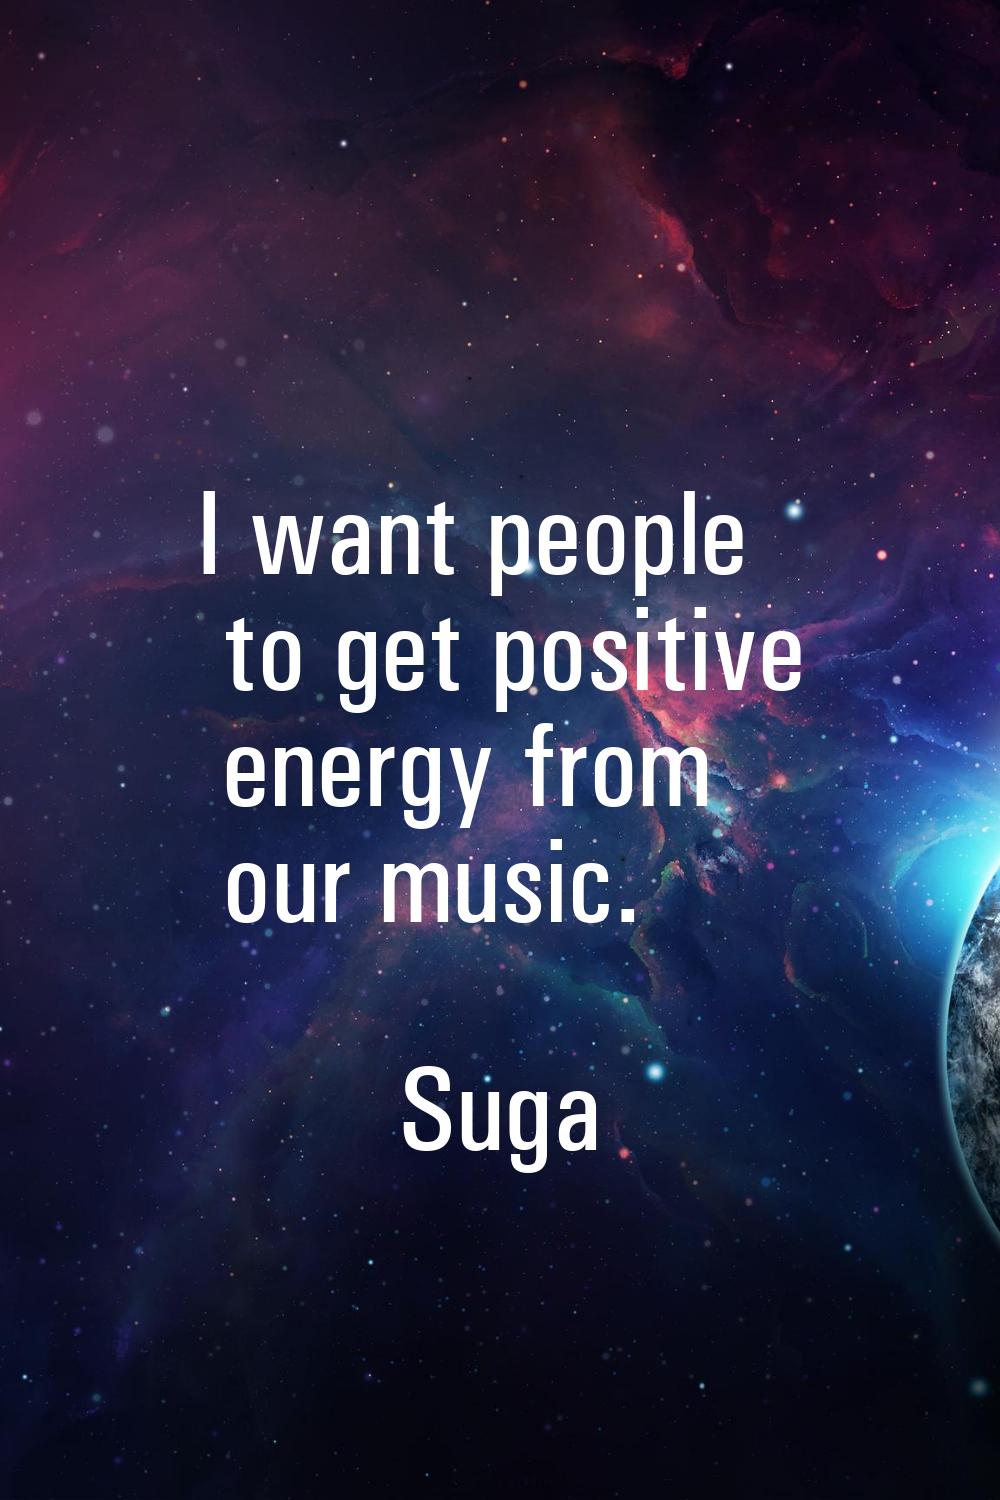 I want people to get positive energy from our music.